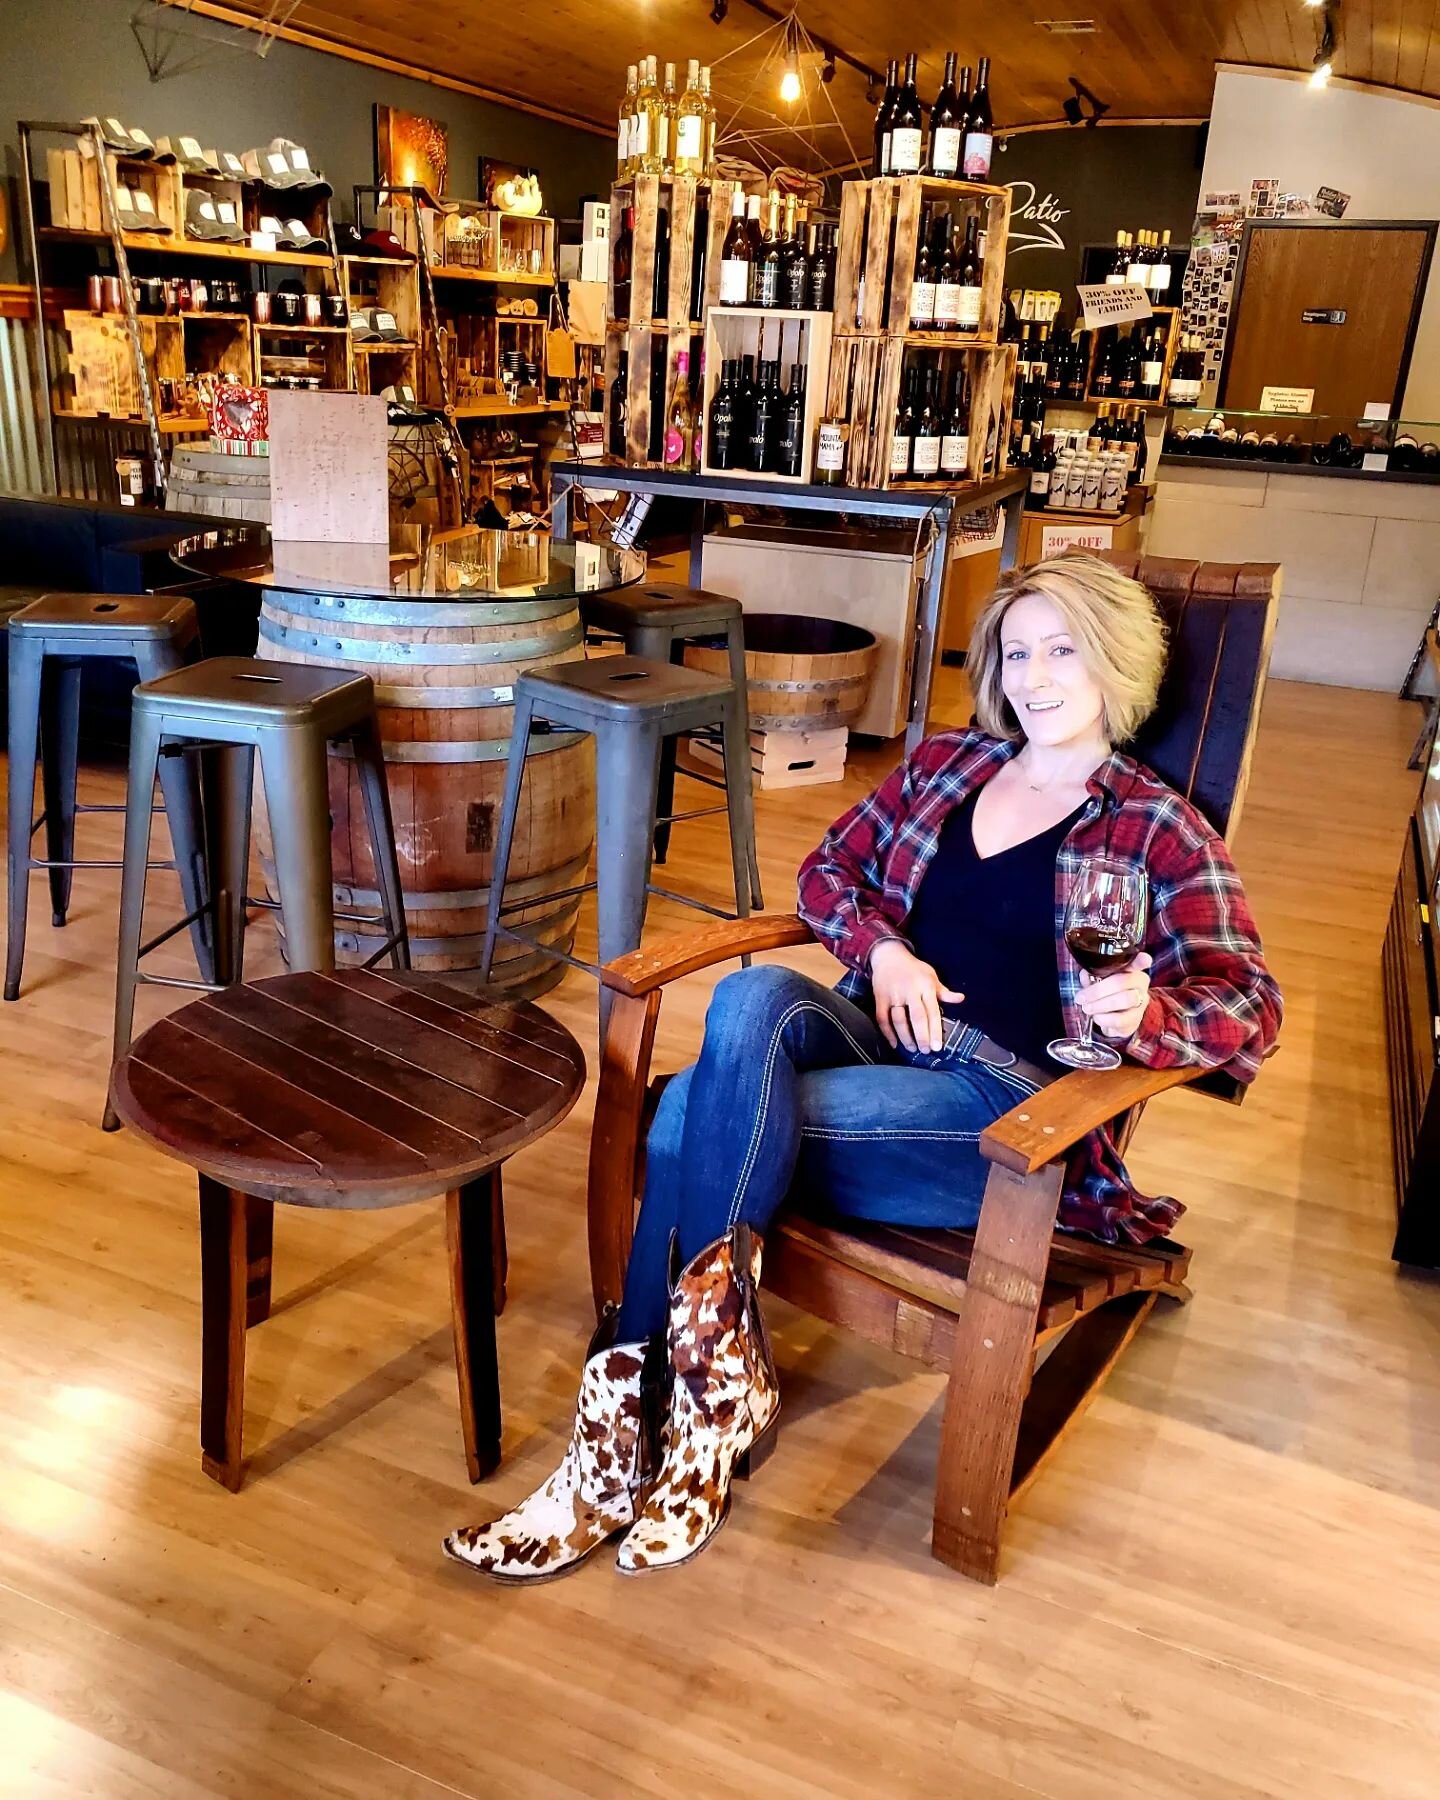 With the first day of Spring tomorrow (if the snow would EVER stop!) We have been stocking up to help bring a slice of wine country to your patio! 

The lake will be glistening, the sun will be shining, and you will be relaxing in your Adirondack Cha